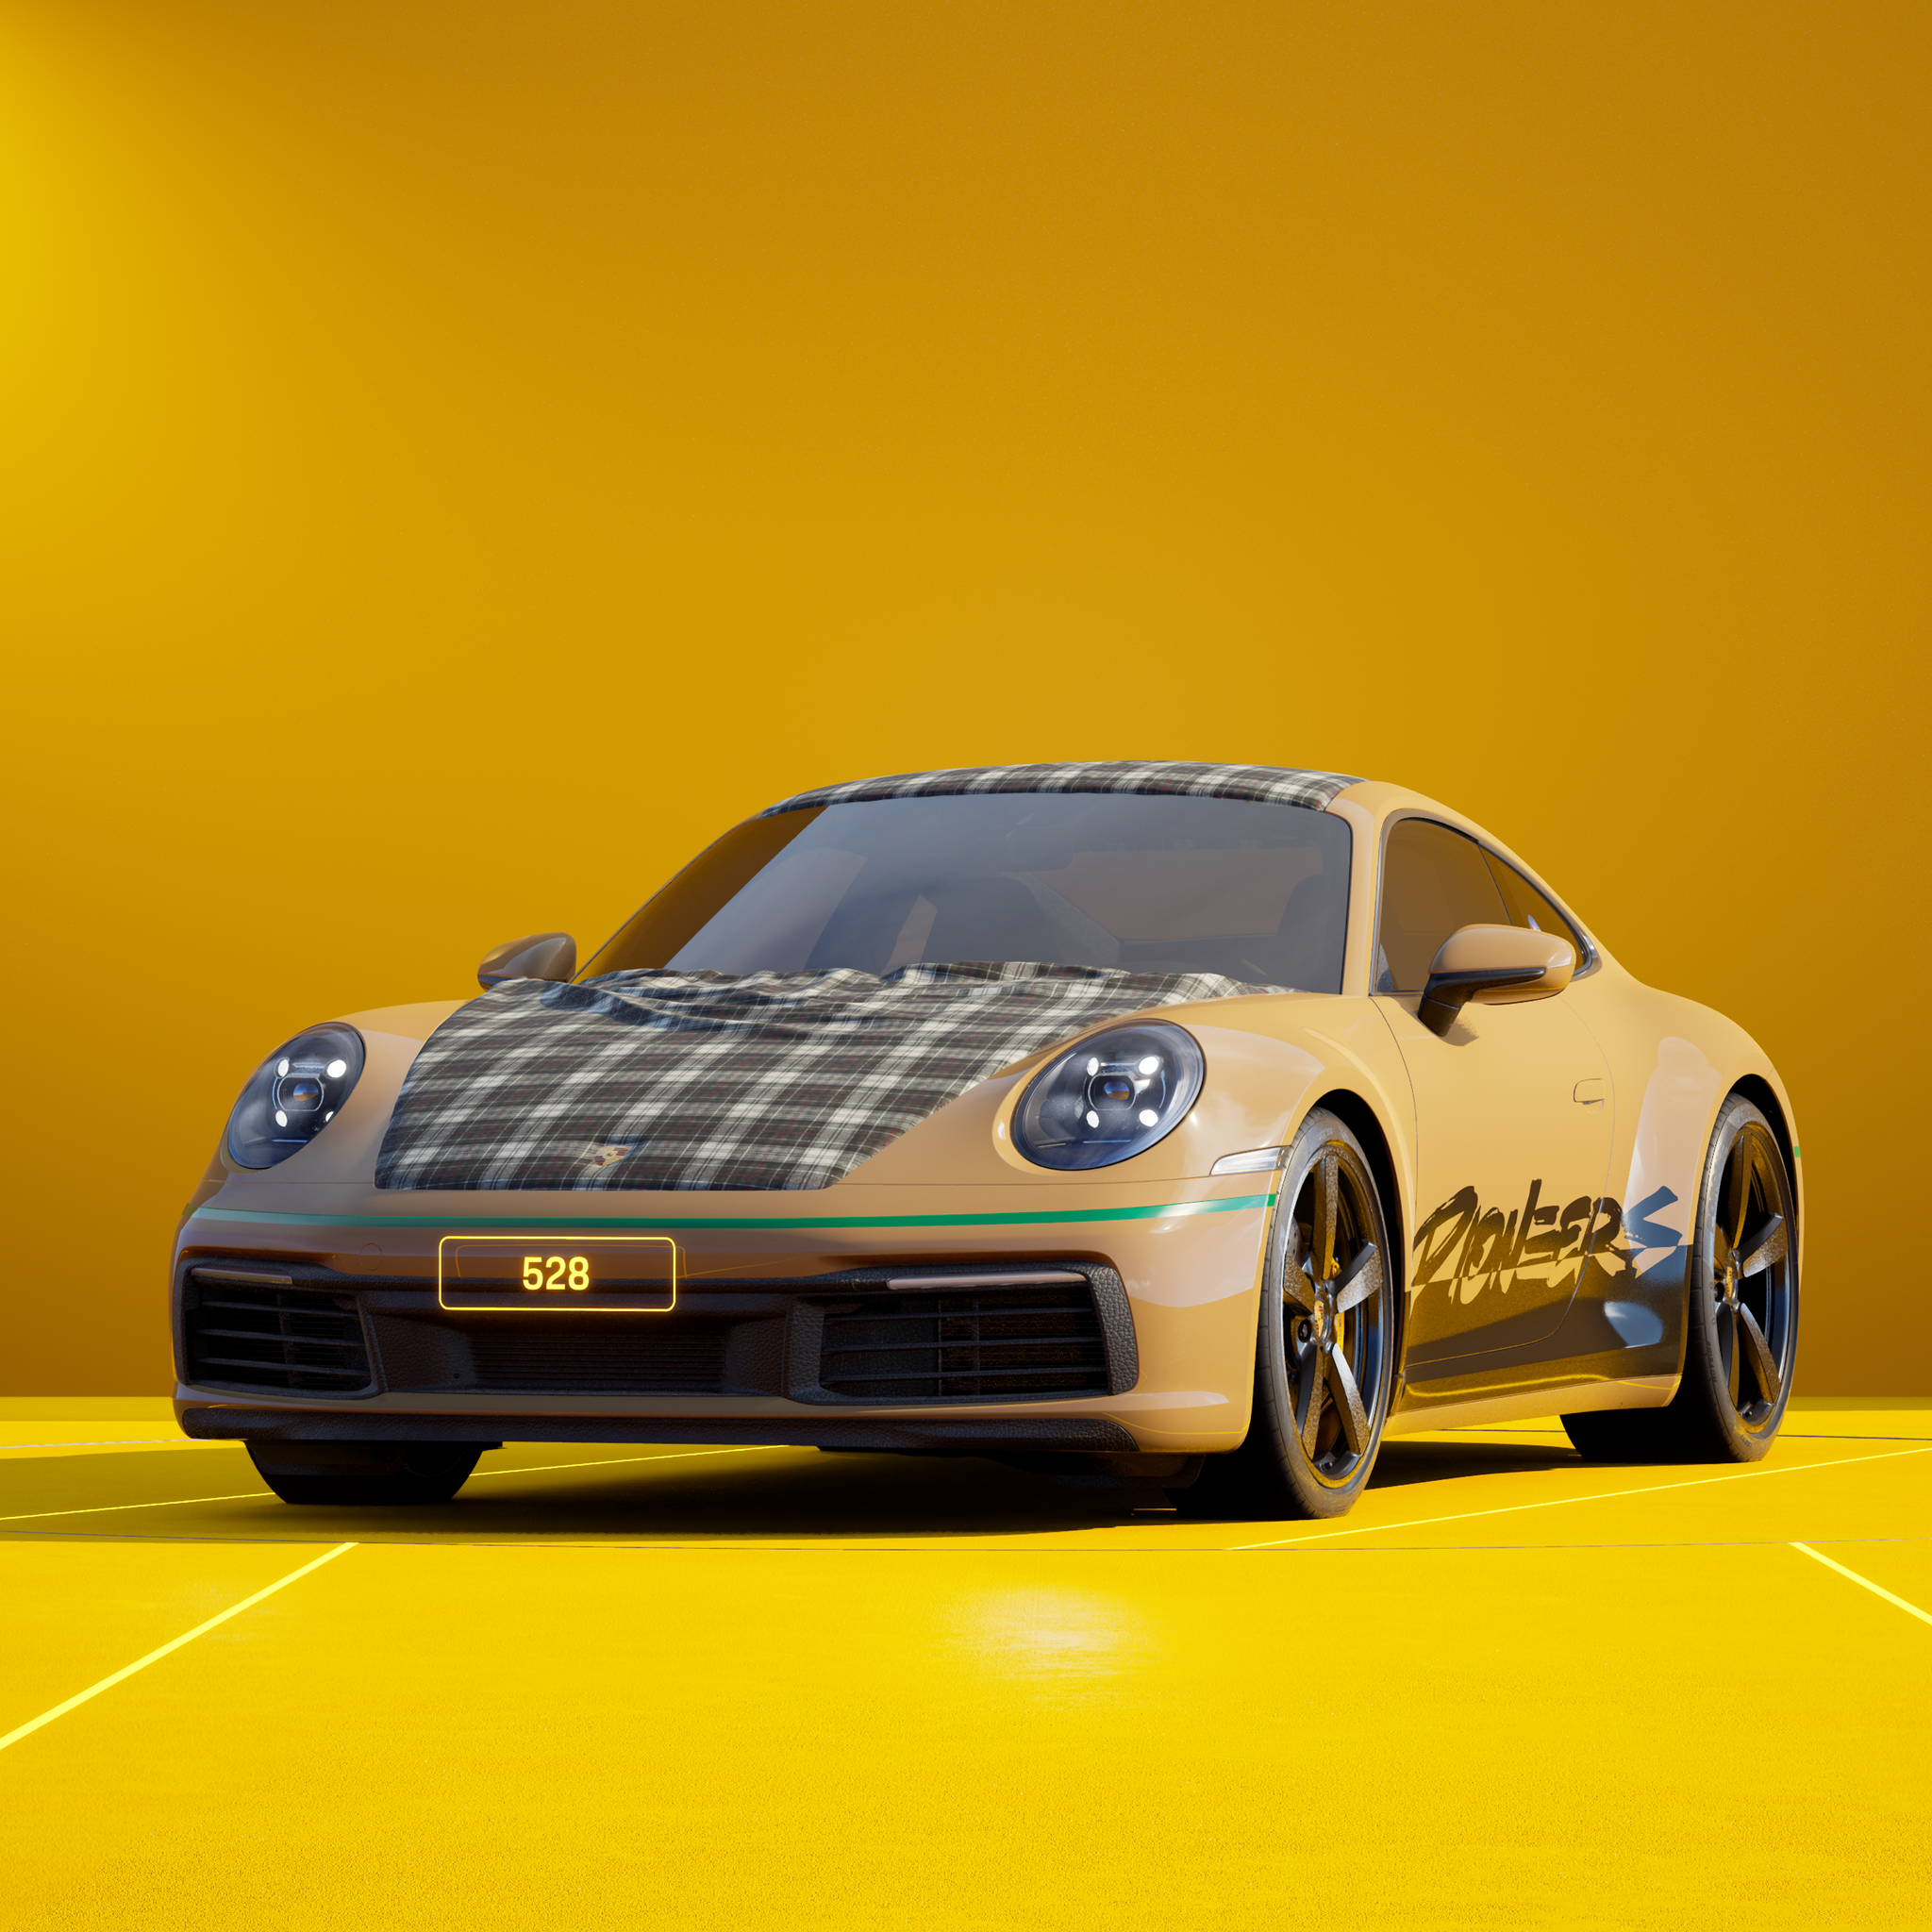 The PORSCHΞ 911 528 image in phase